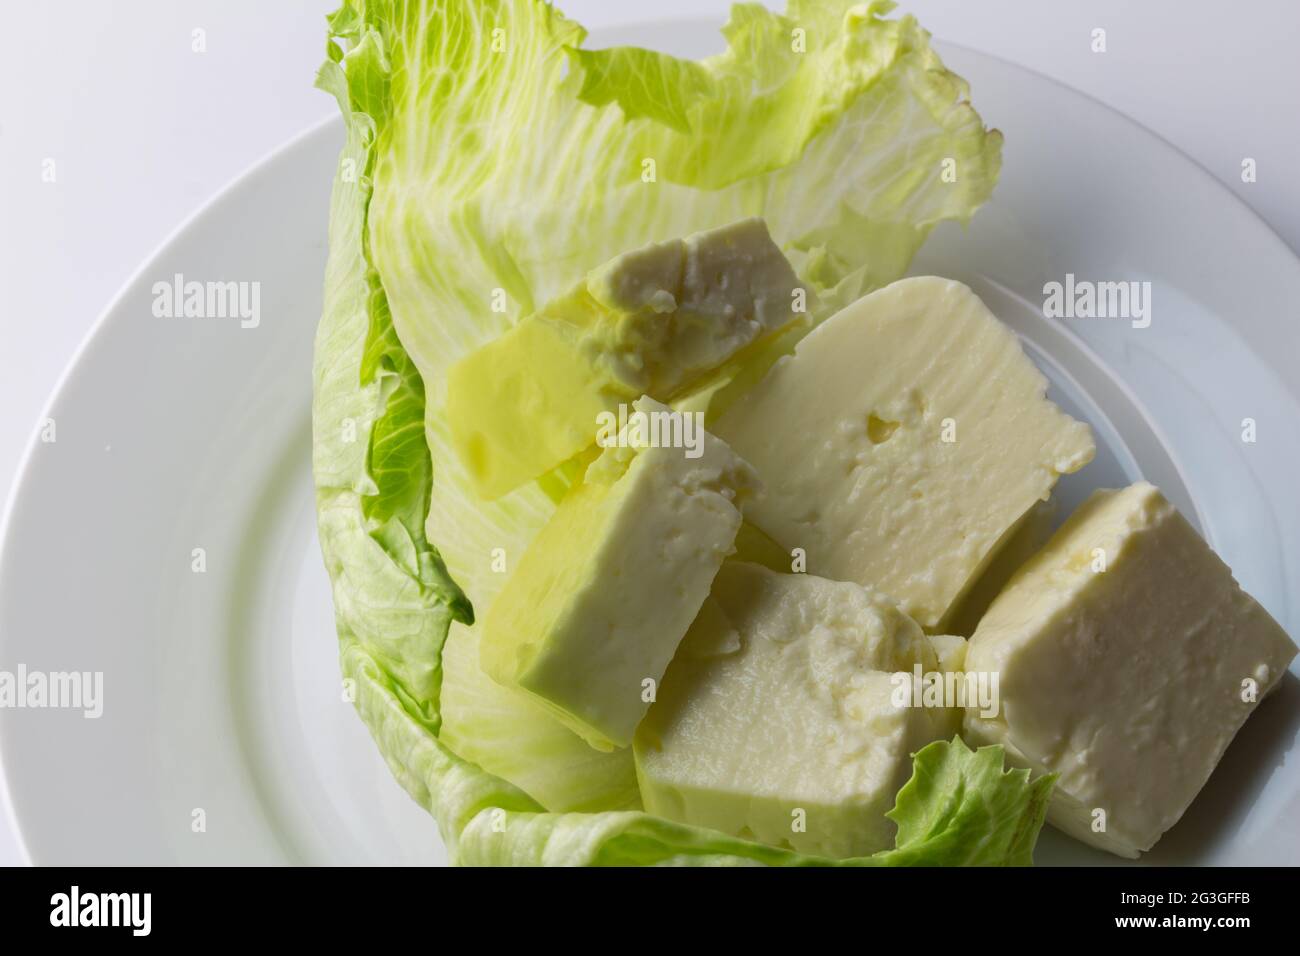 Feta cheese cubes on lettuce leaf close up - white background with soft curd cheese Stock Photo